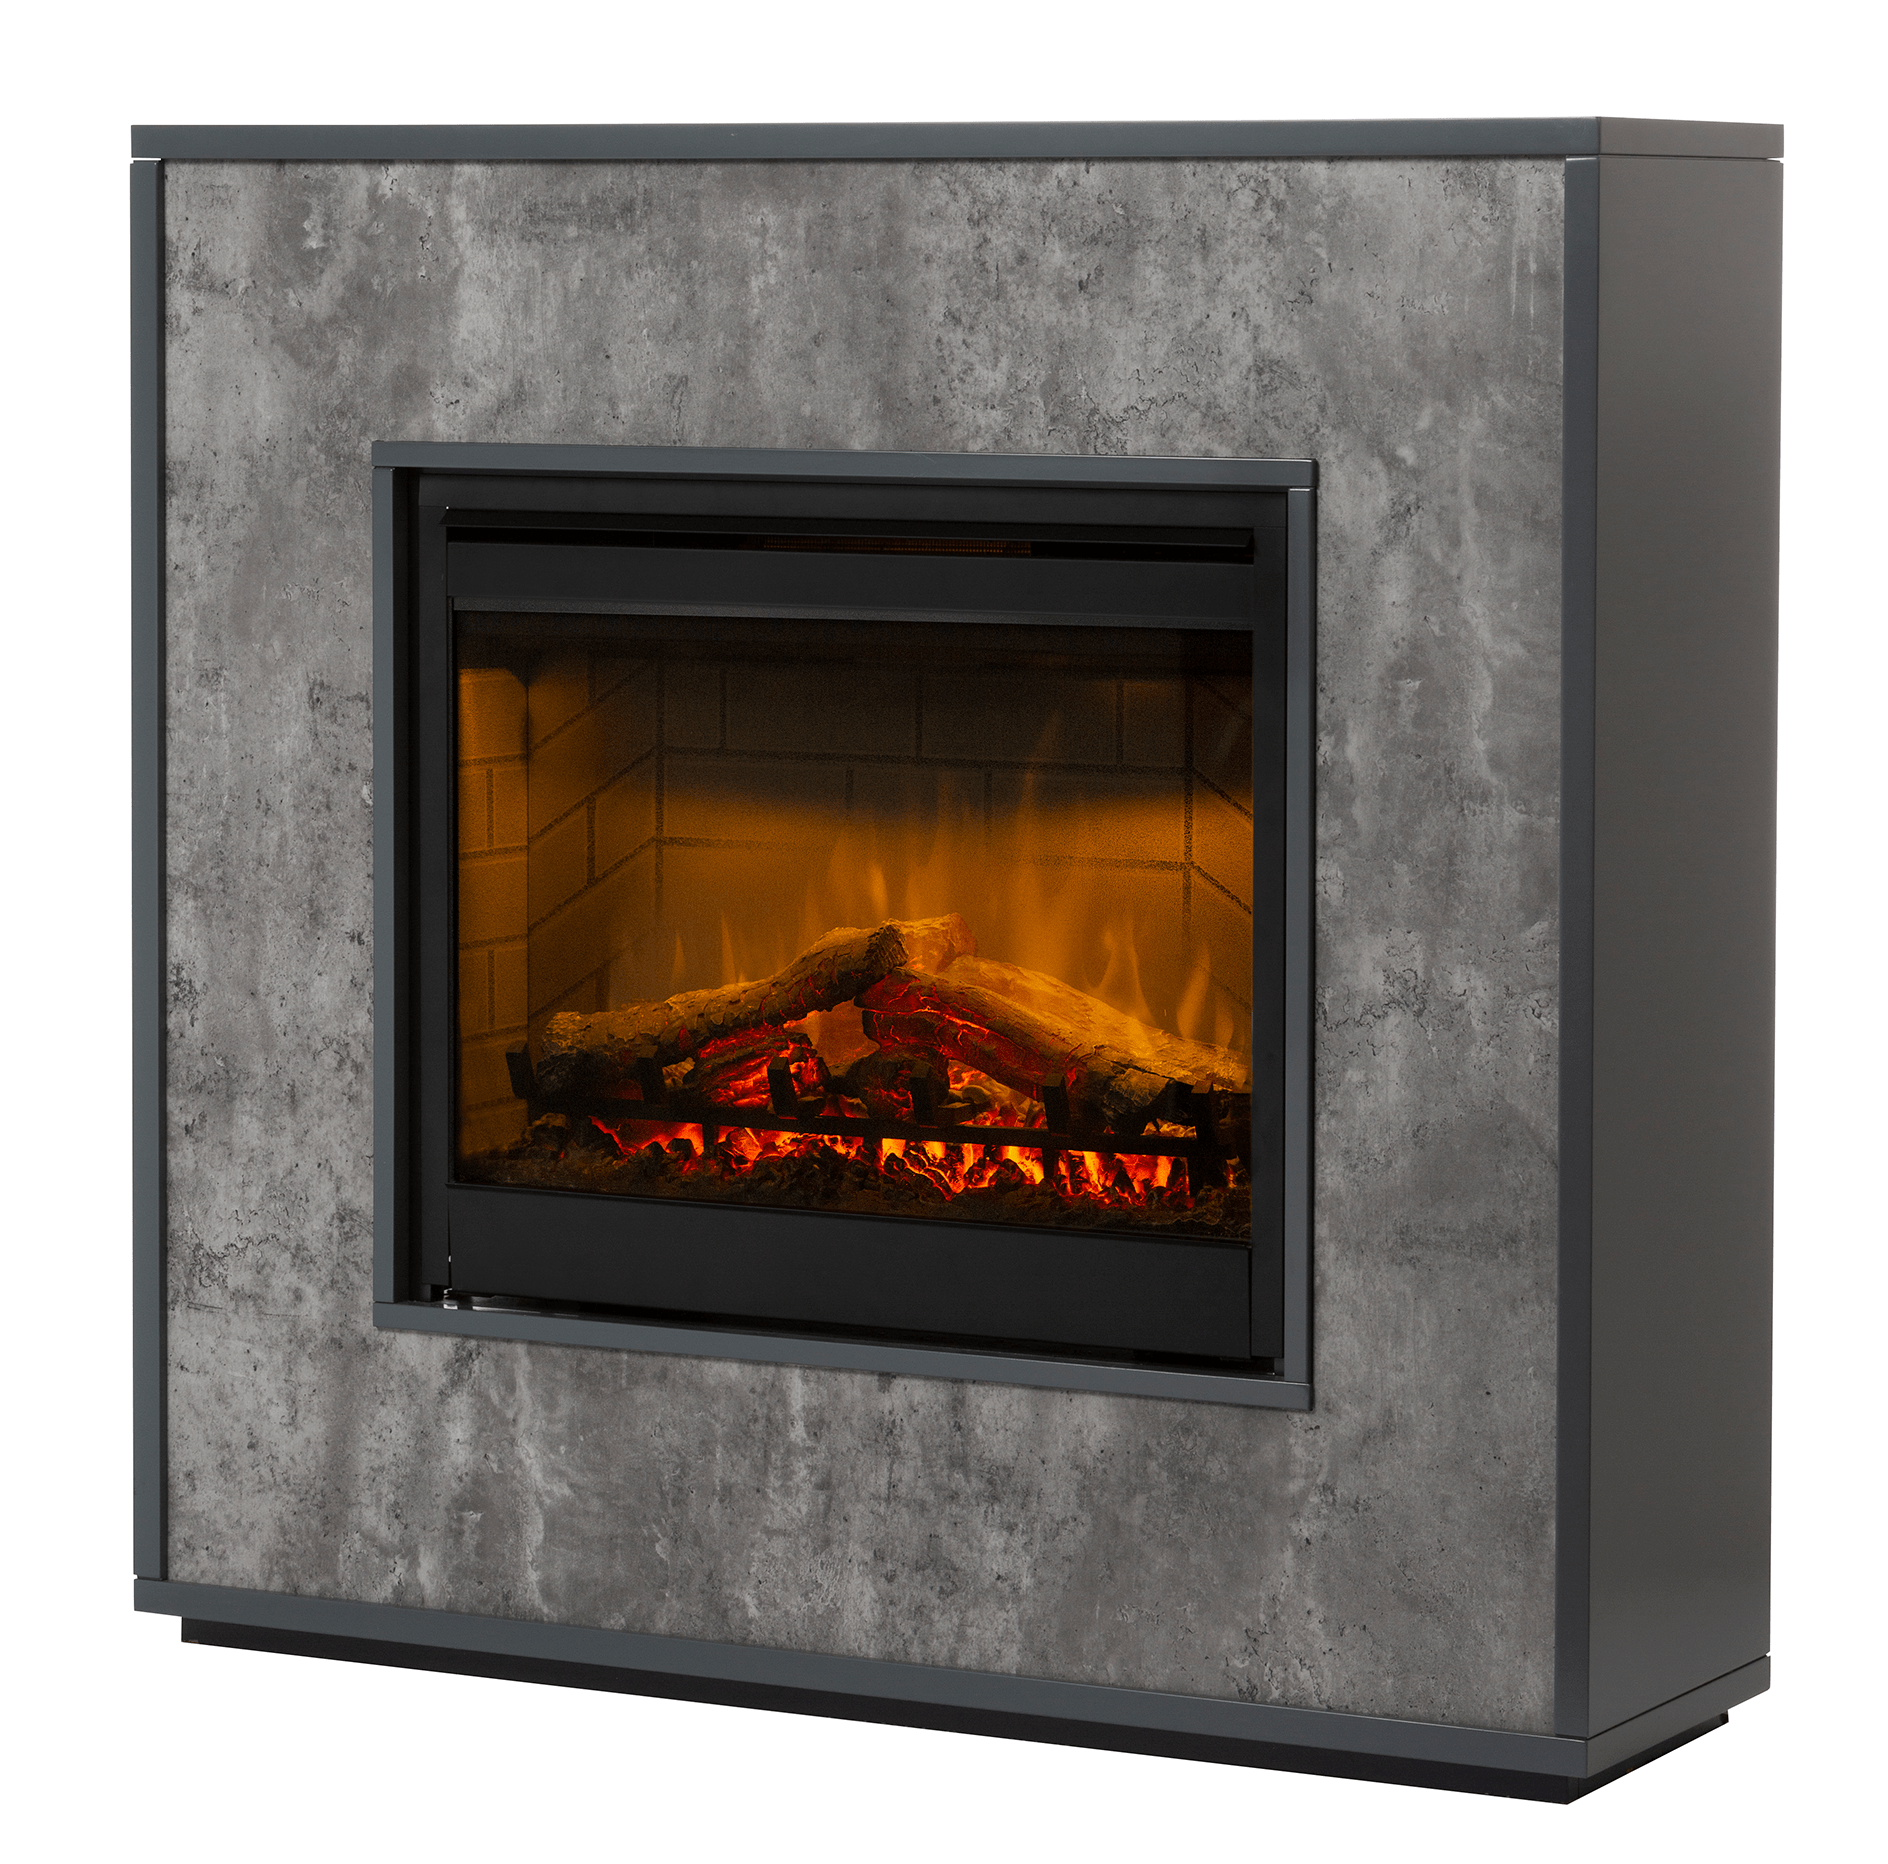 Dimplex 2kW Atlantic Mantle with 26 LED Firebox